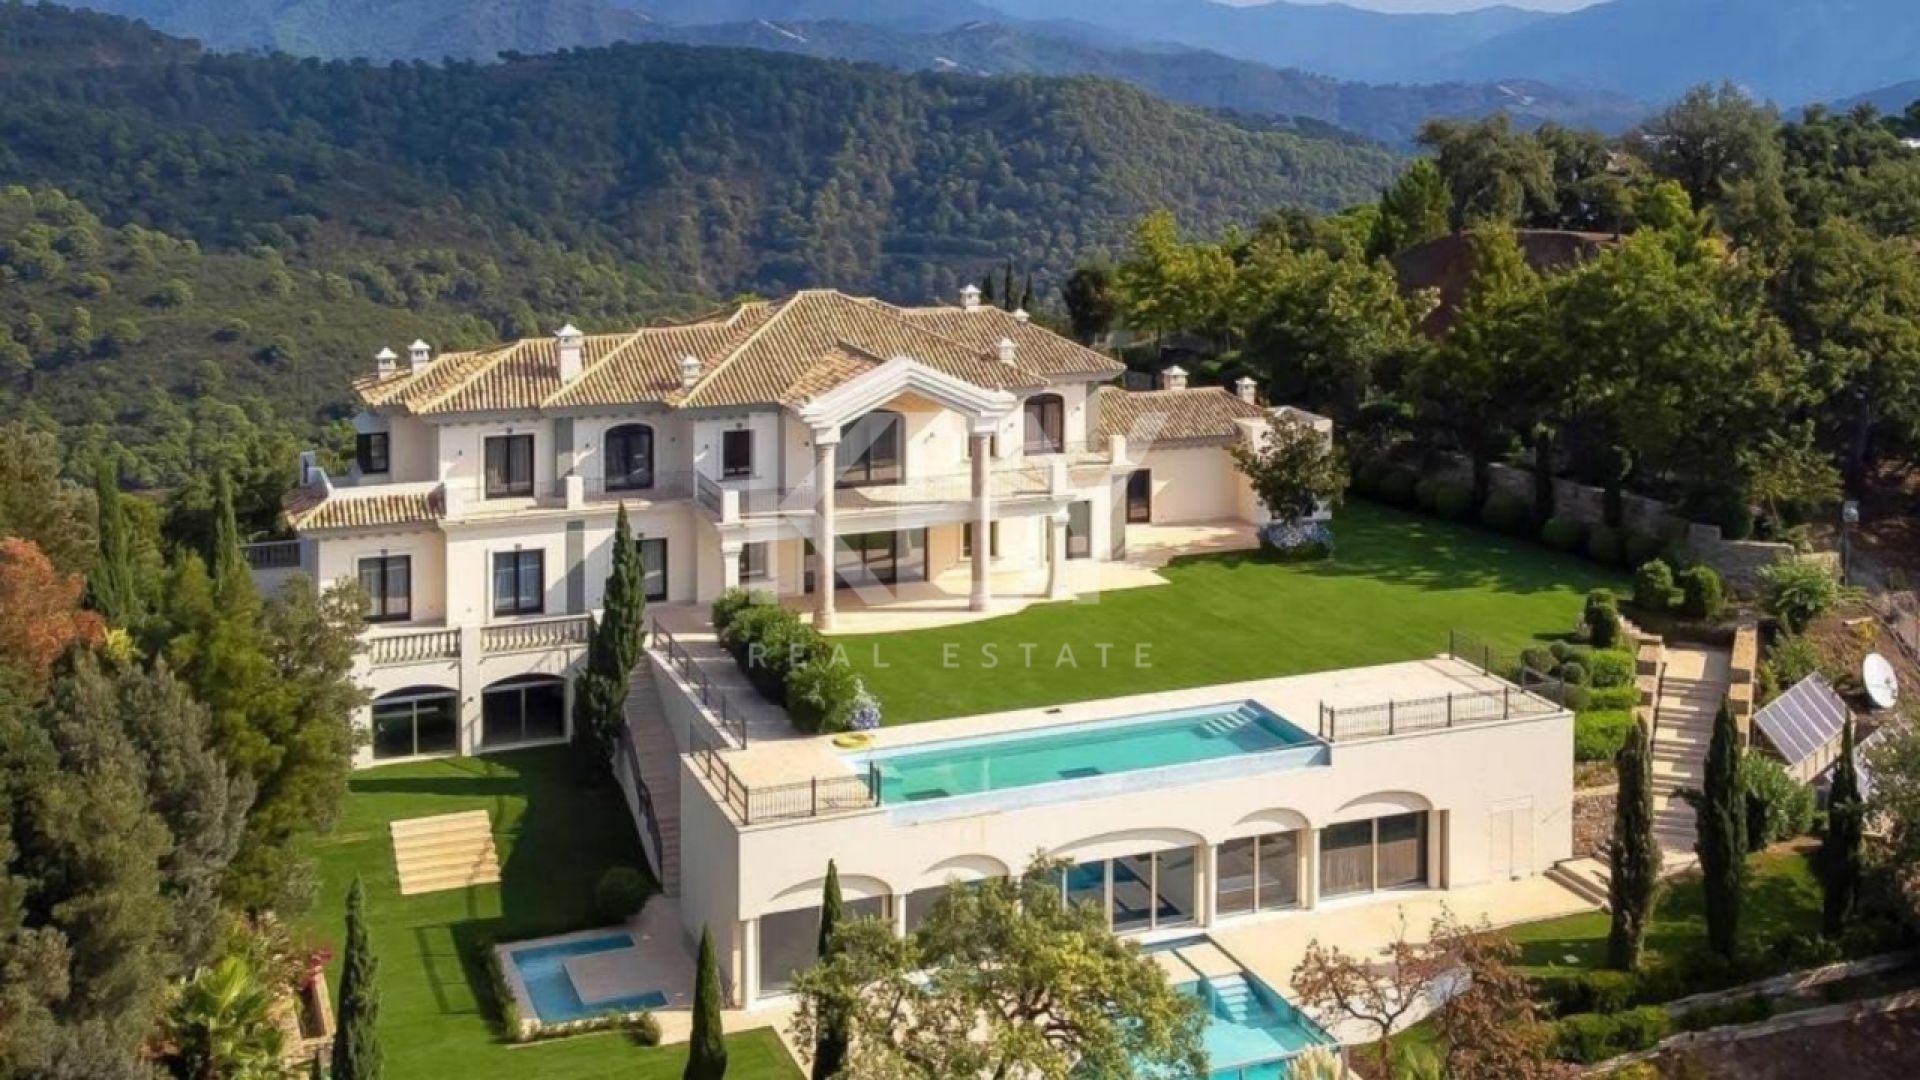 Magnificent mansion for sale in La Zagaleta: elegance, privacy, and breathtaking views